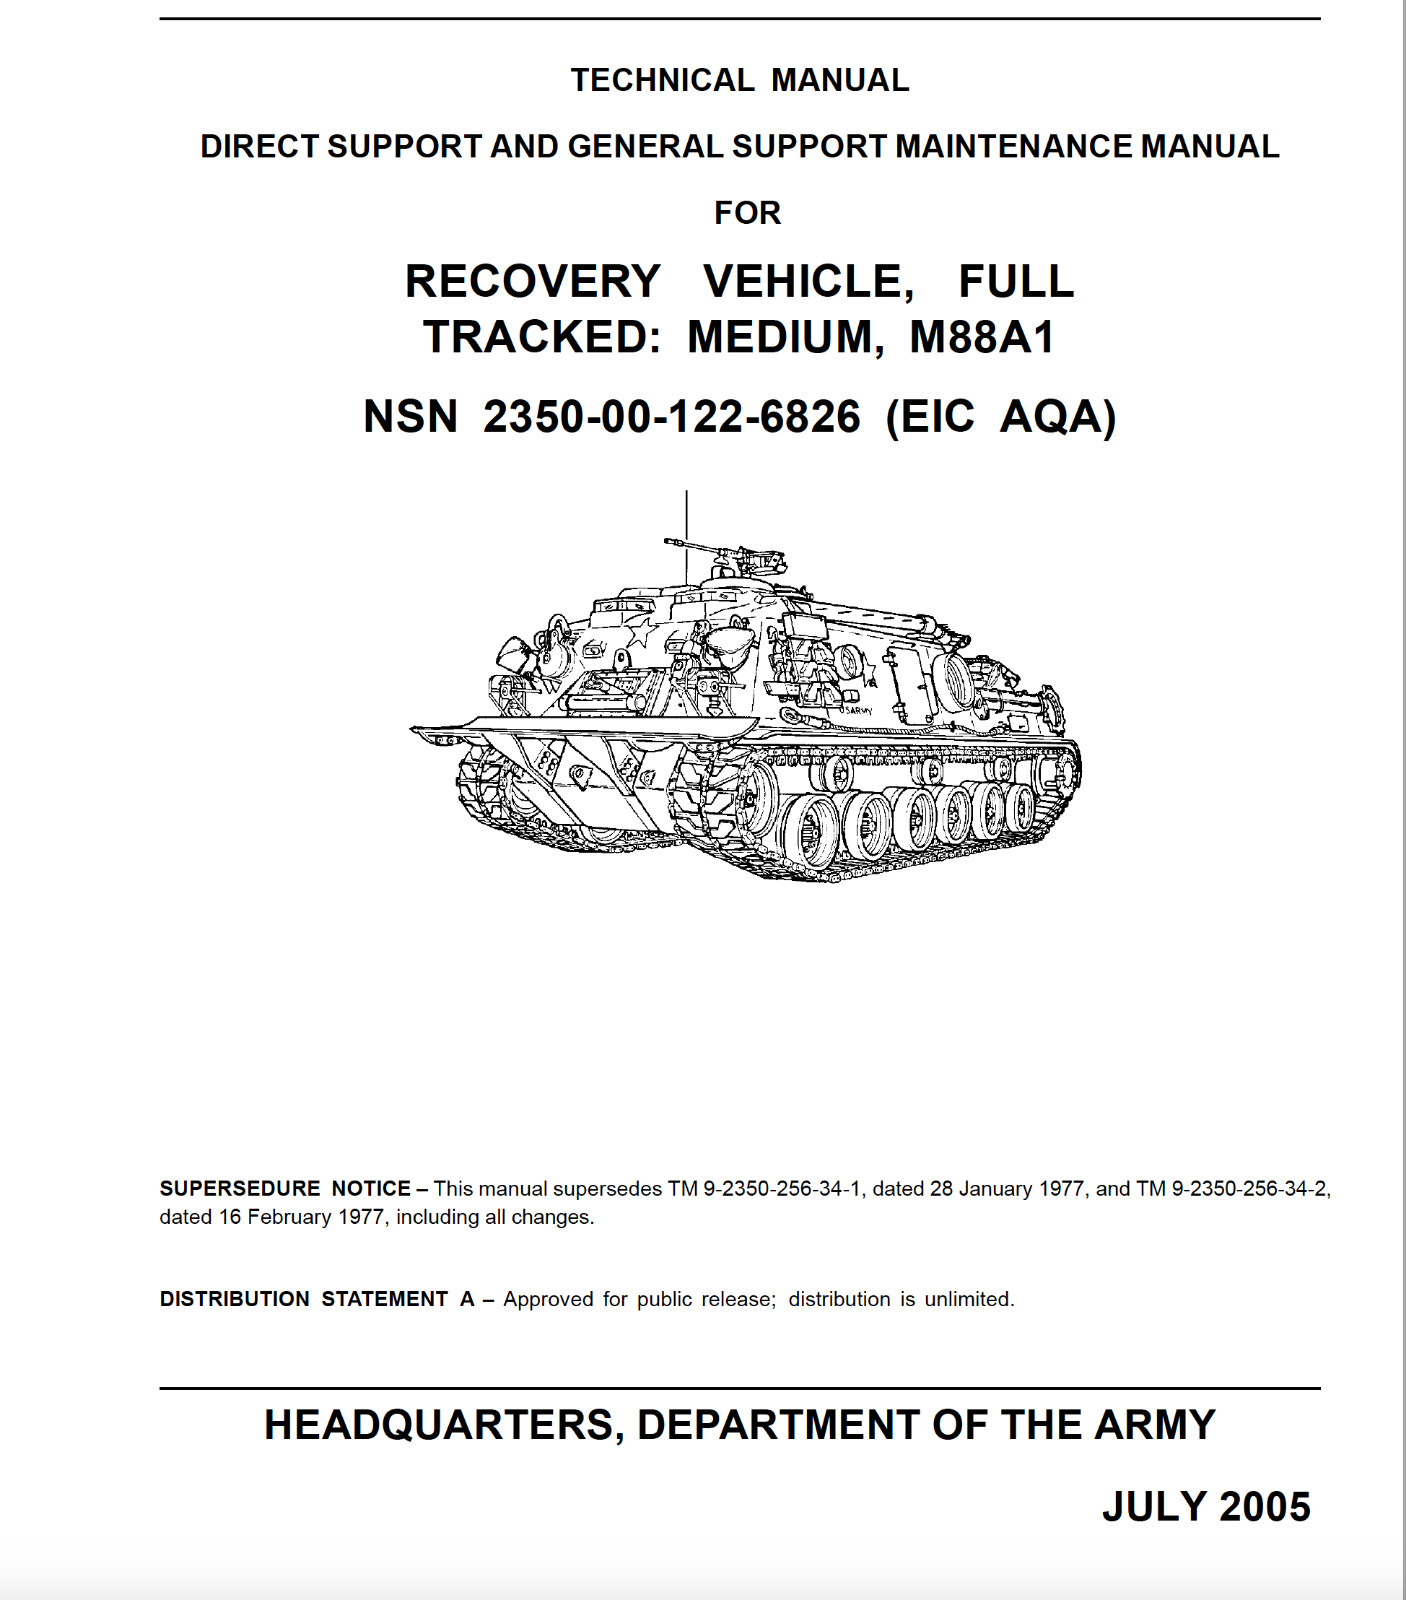 5,842 Page M88A1 RECOVERY TANK MAINTENANCE, REPAIR PARTS AND TOOLS Manuals on CD